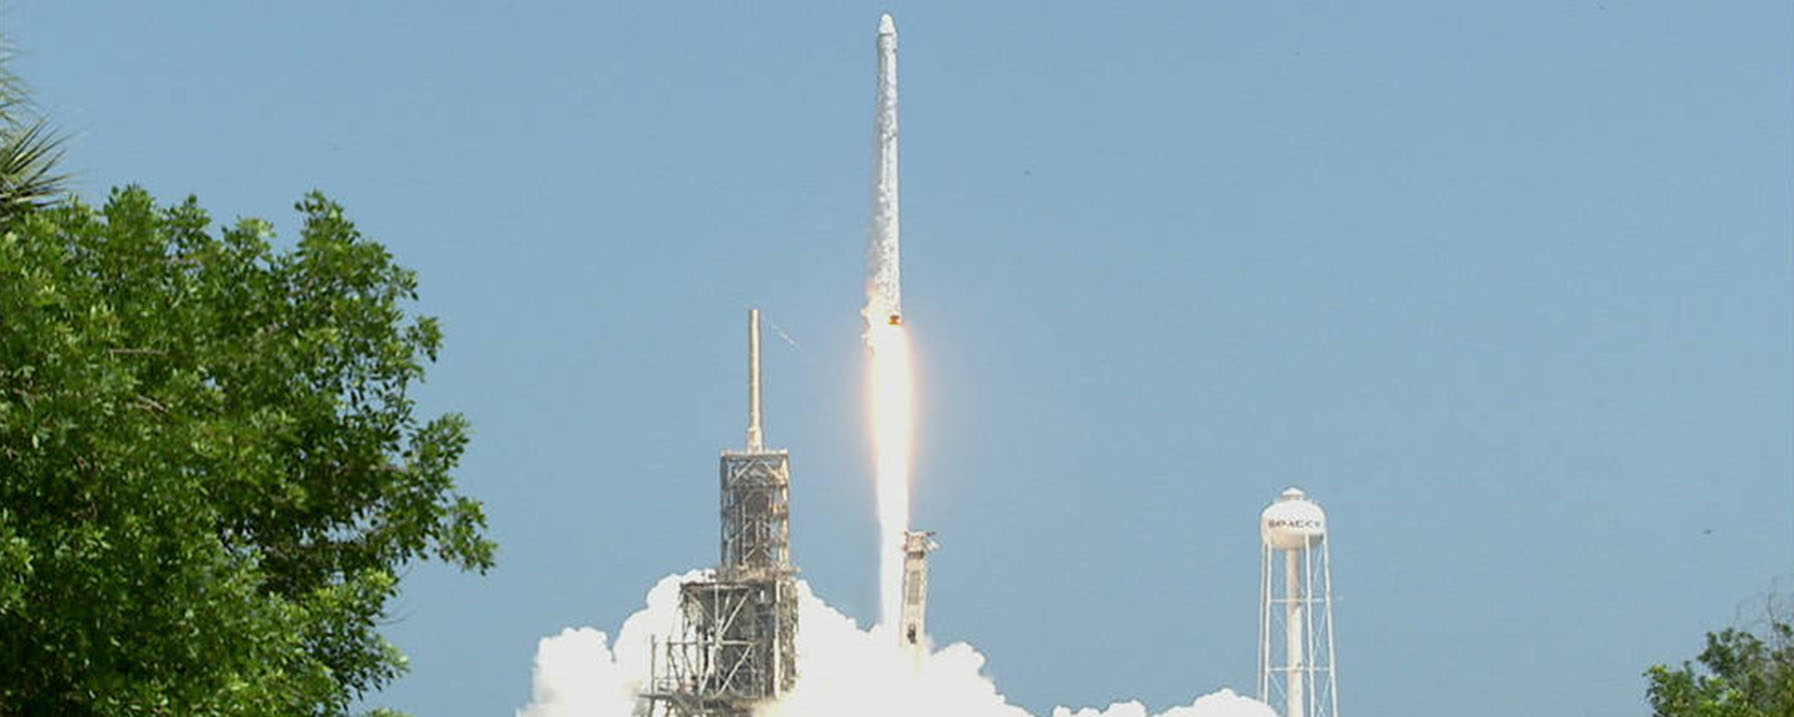 SpaceX launched its 12th resupply mission to the International Space Station from NASA's Kennedy Space Center in Florida